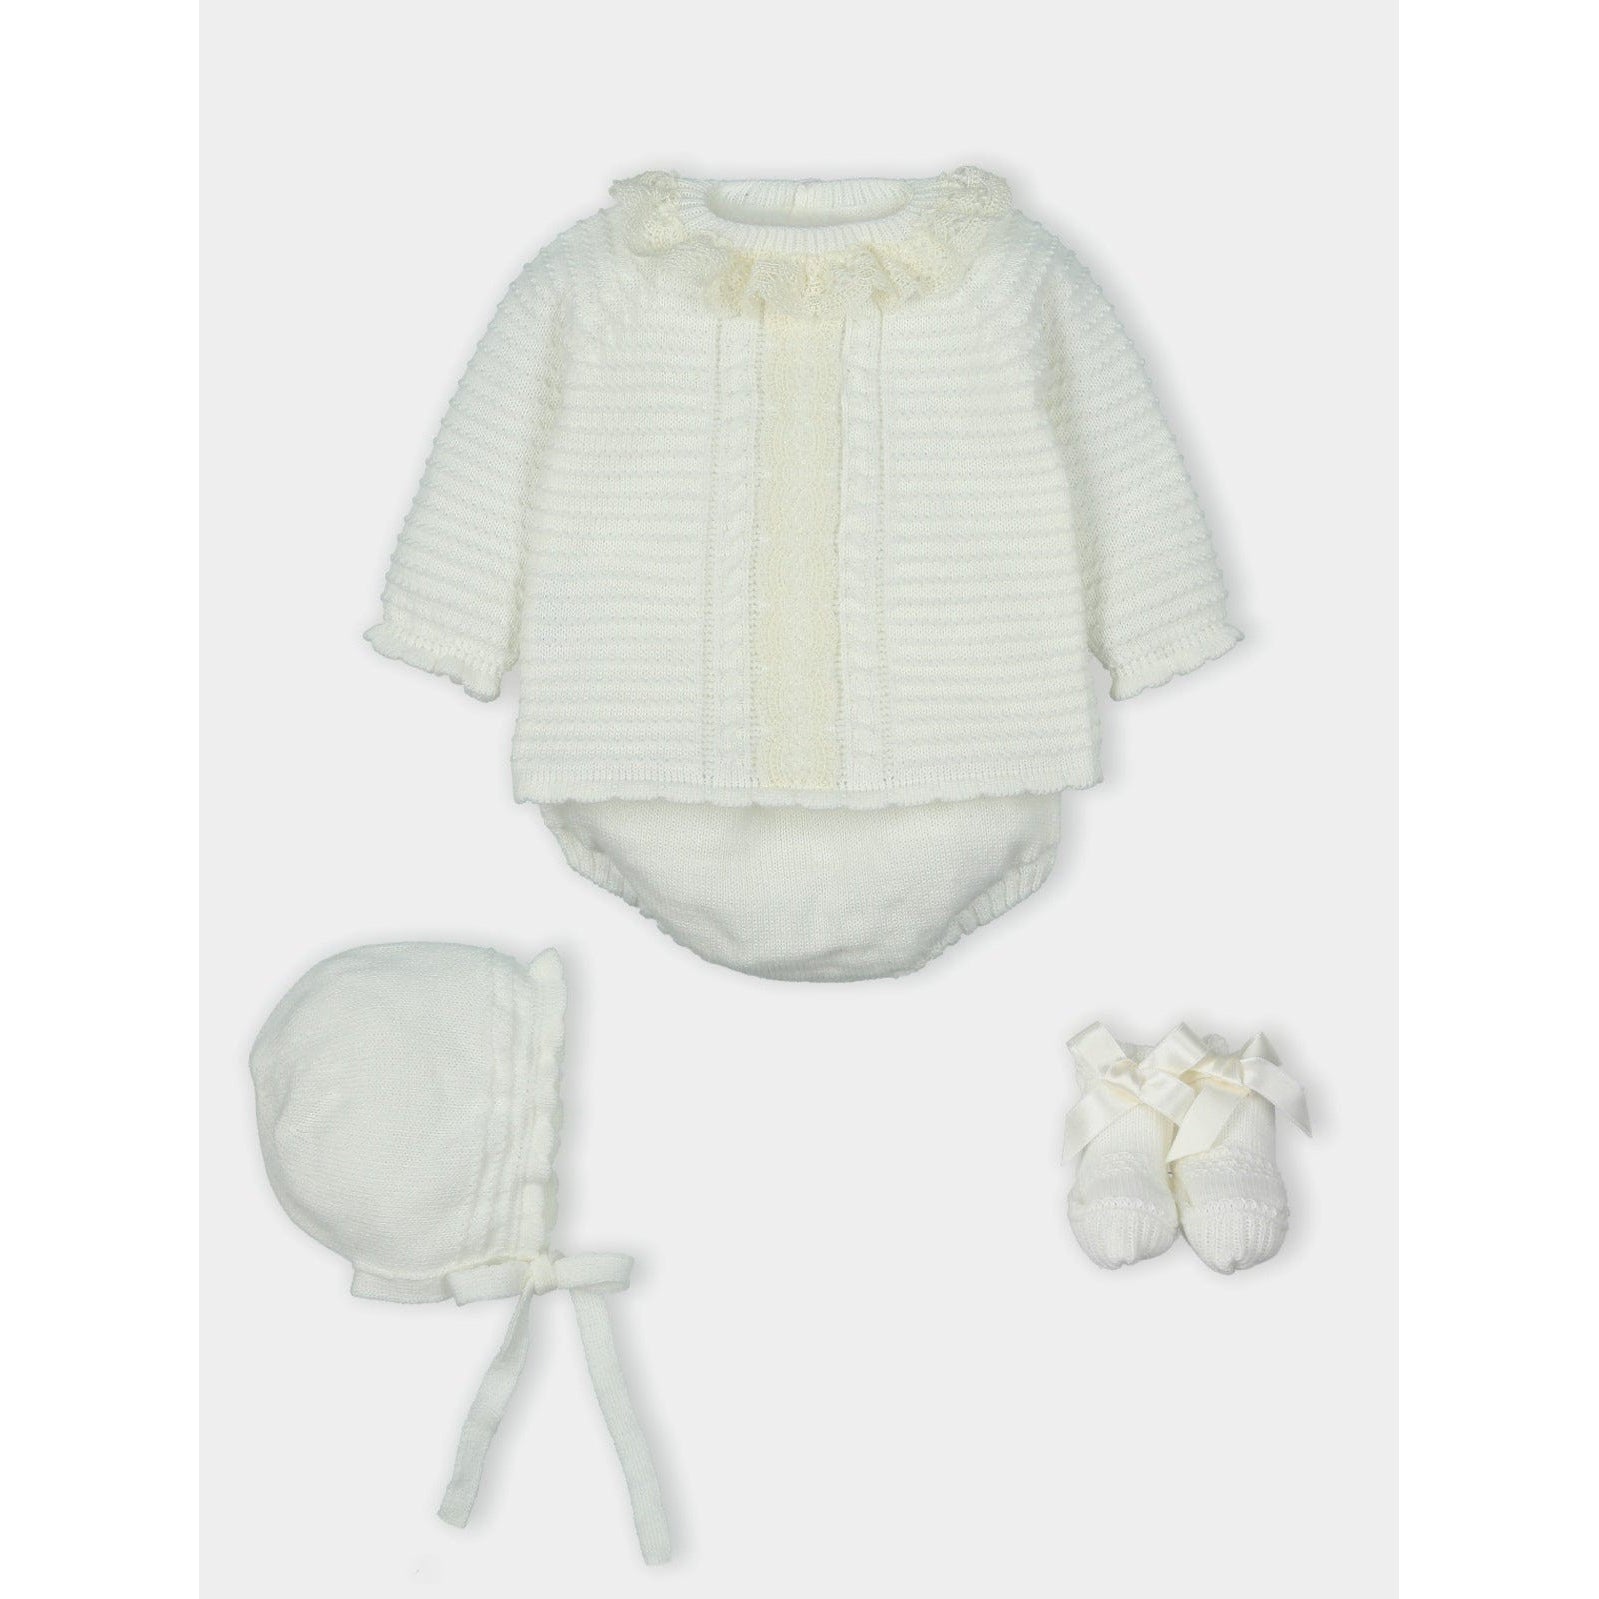 Mac Ilusion Sets 01 Mac Ilusion Baby Girls Crude Four Pieces Knitted Sweater, Bonnet And Booties